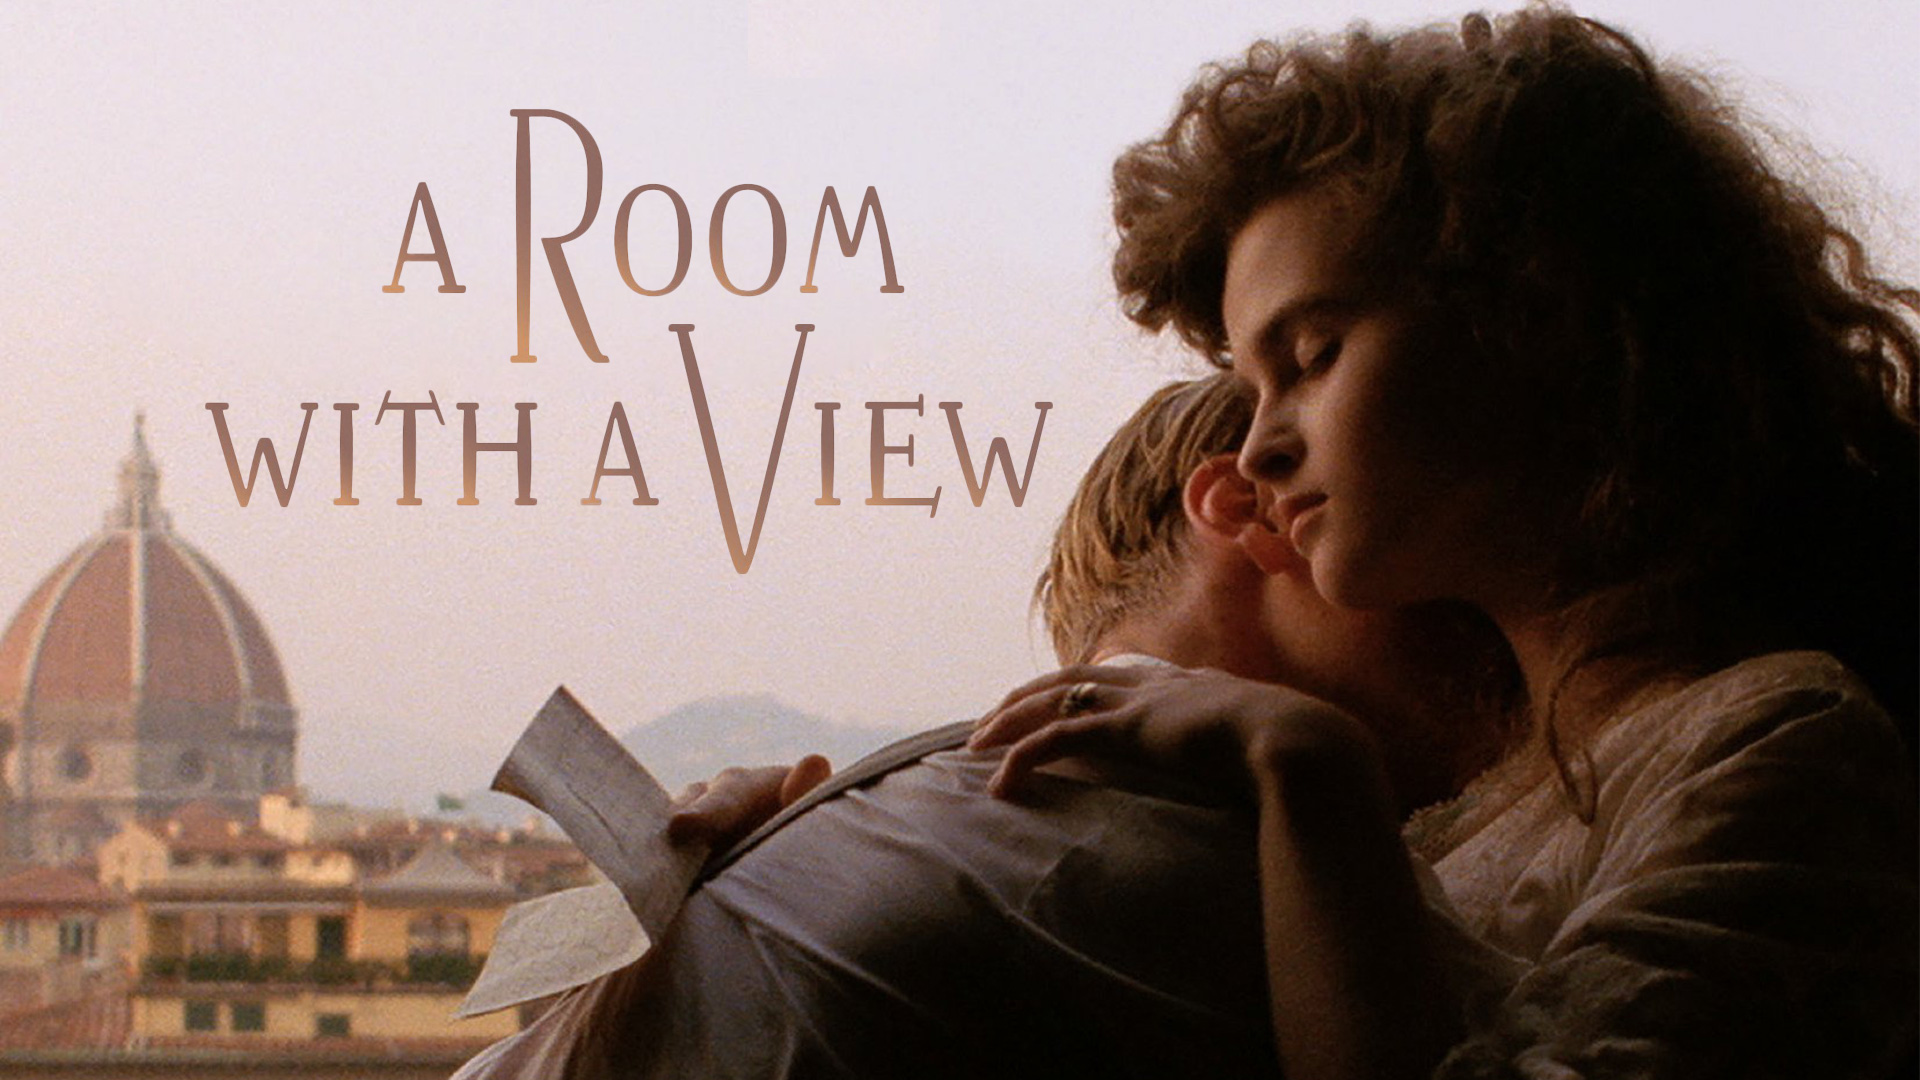 A Room With A View (translated): English To Brazilian